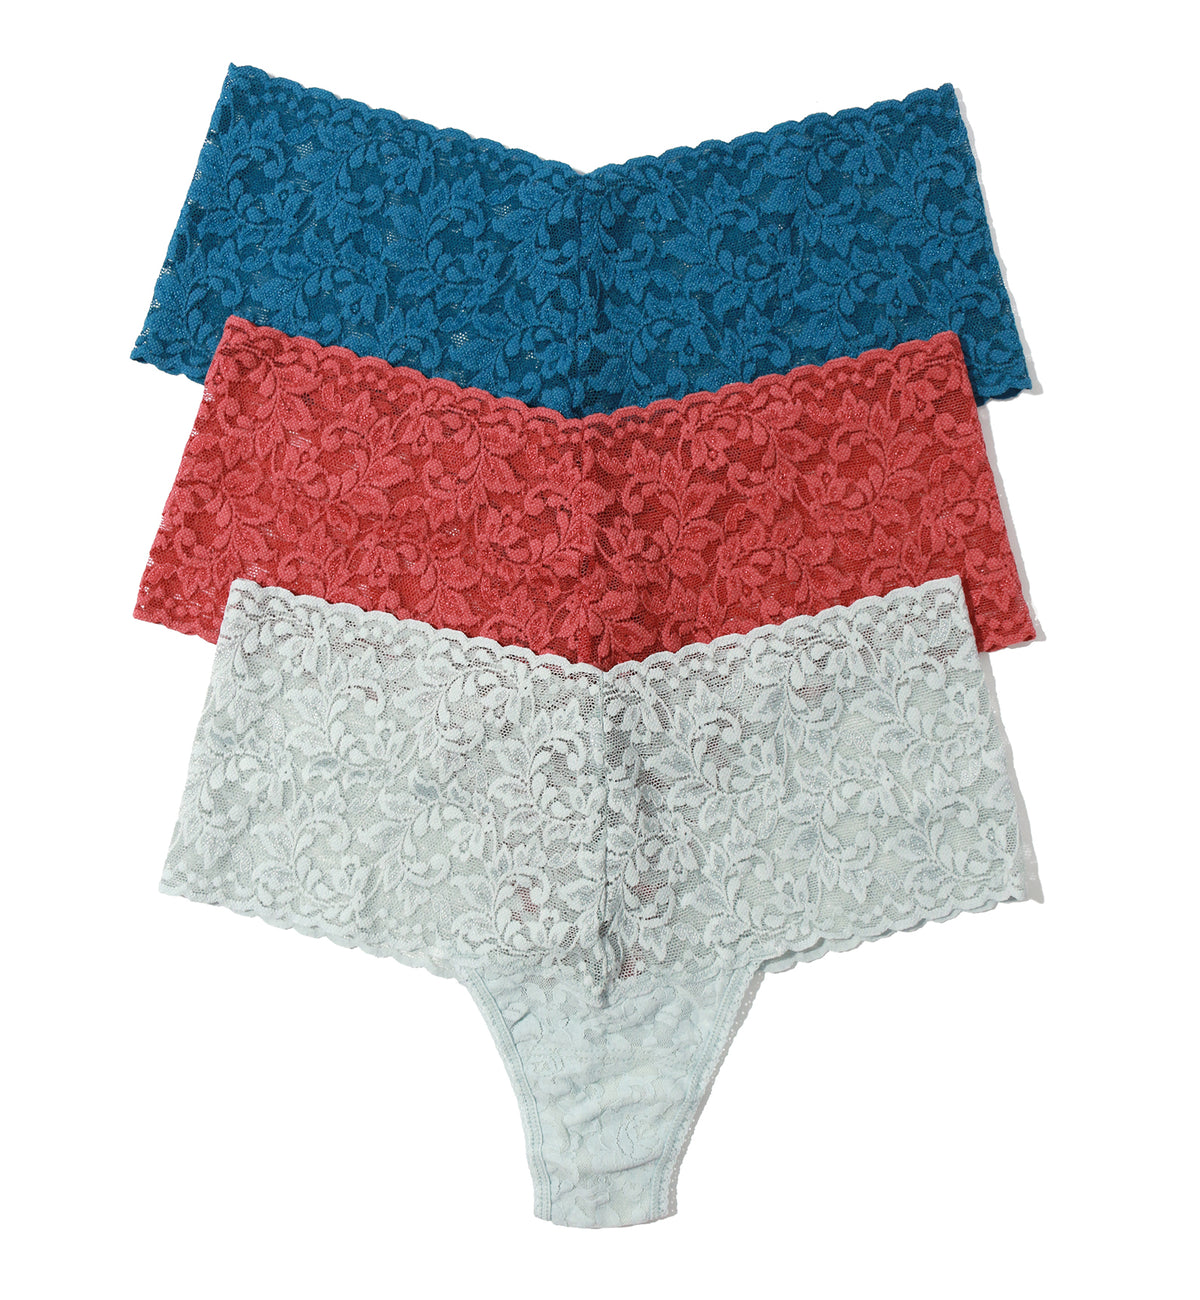 Hanky Panky 3-PACK Signature Lace Retro Thong (9K193TPK),Holiday23 CSPS - CSPS,One Size